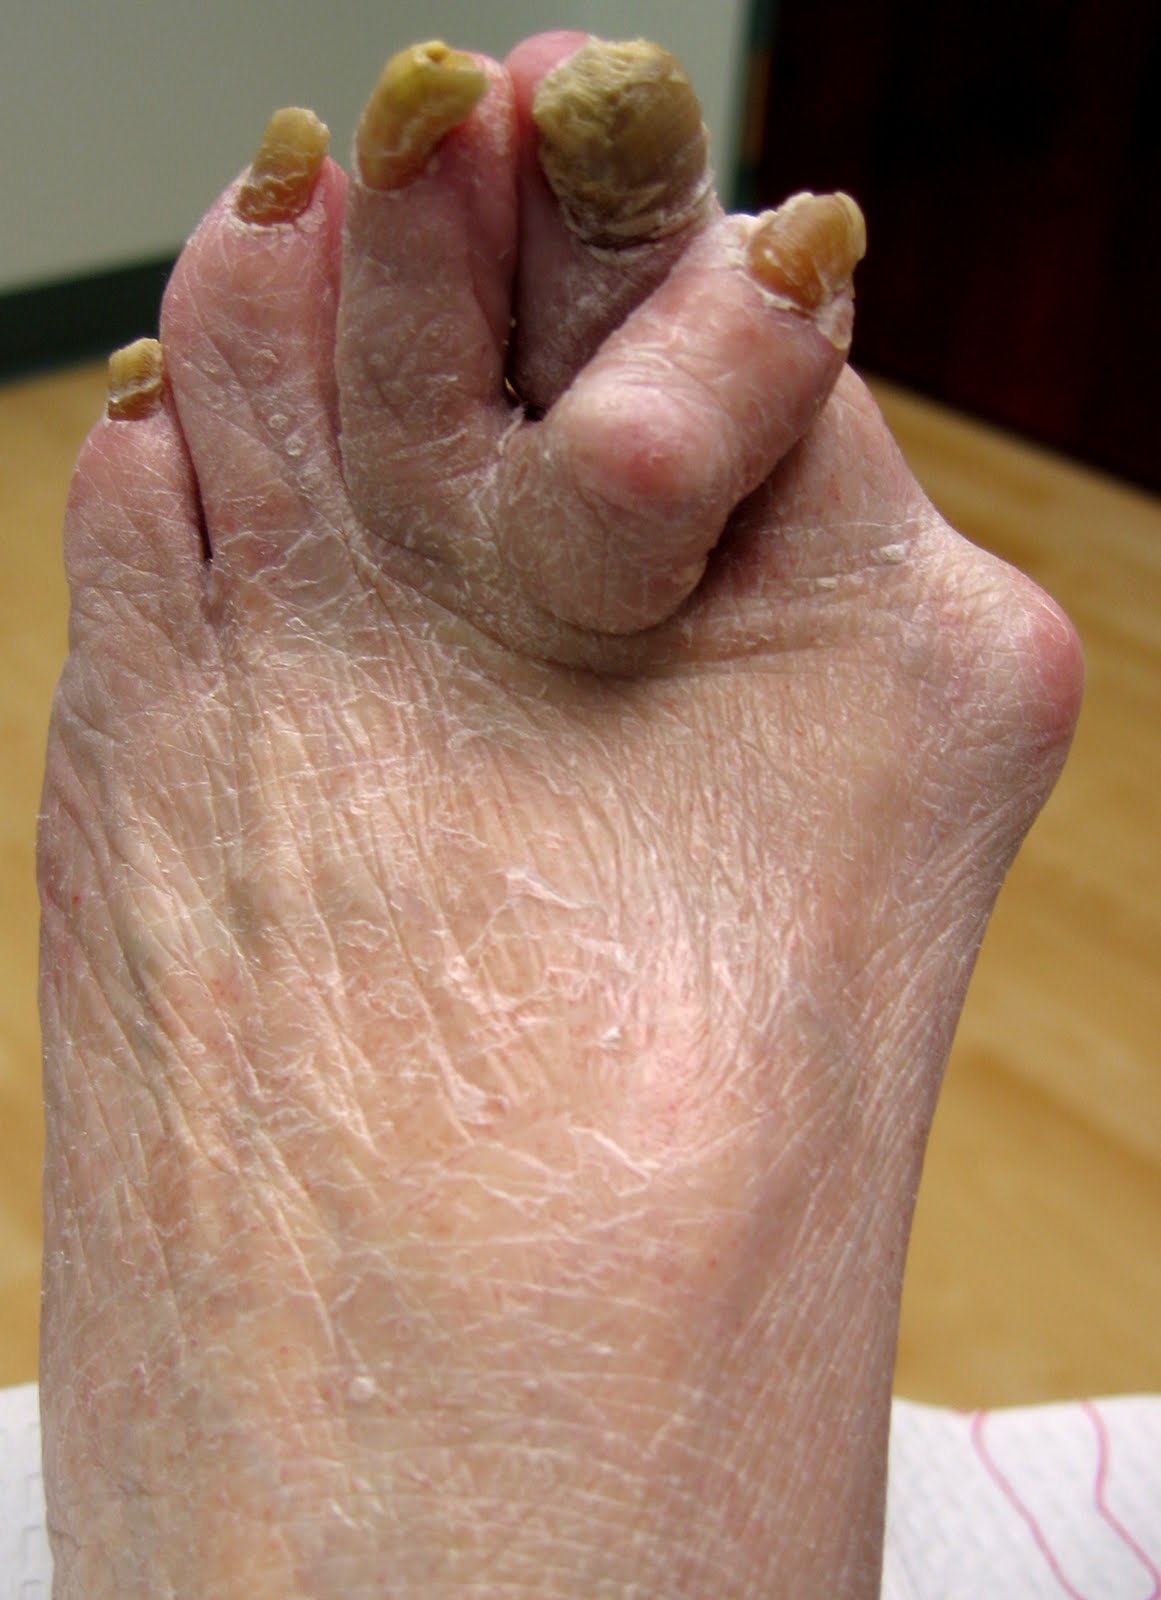 Feet pictures ugly Ouch! 7